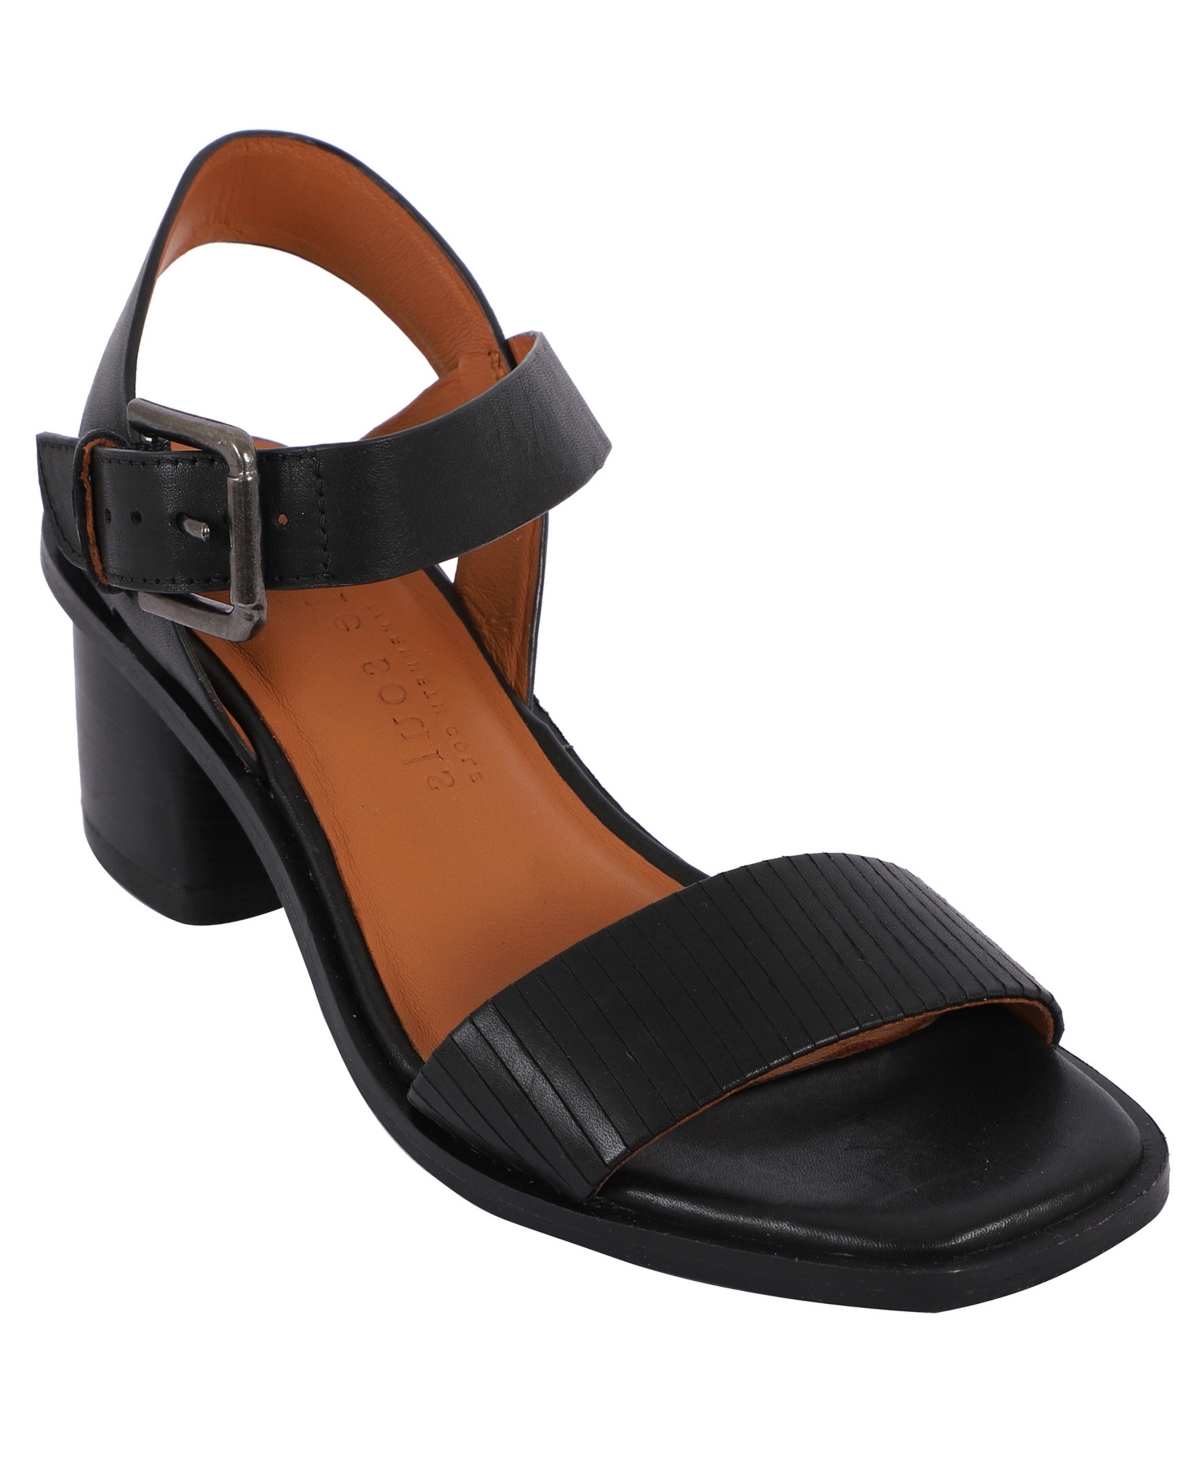 Women's Maddy Block Heeled Sandals - Luggage